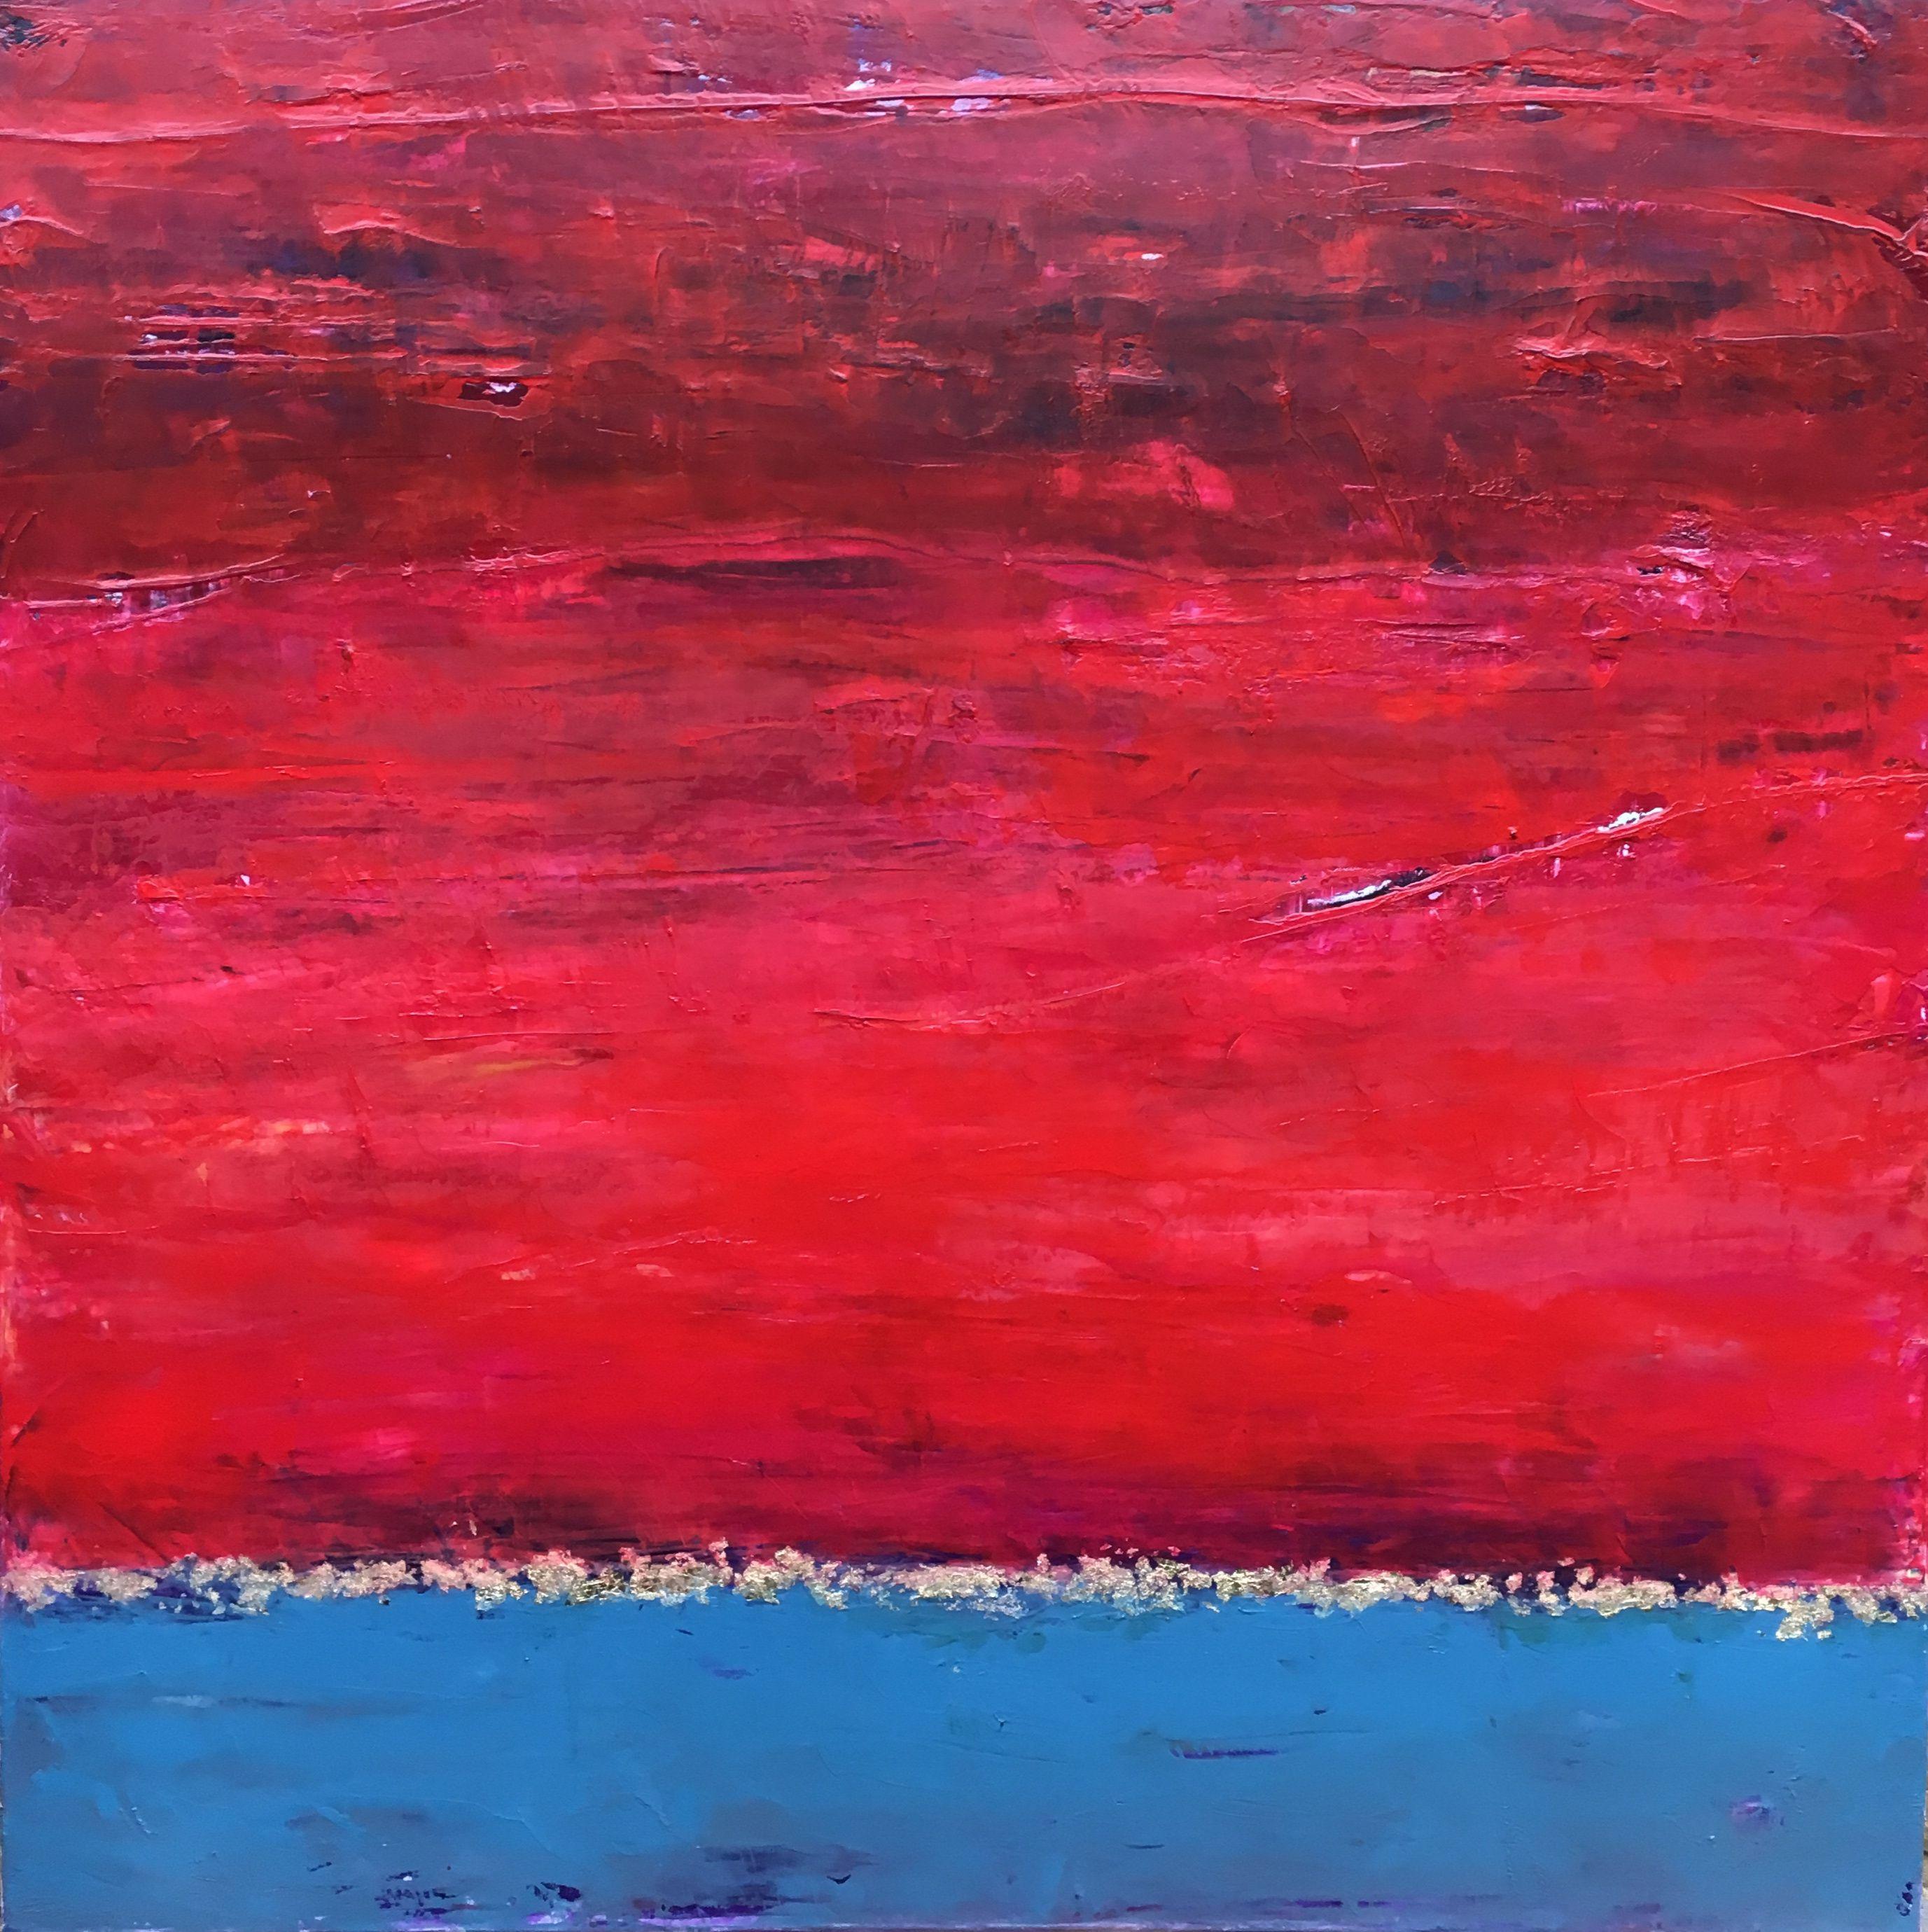 Angela Dierks Abstract Painting - You're the Sky, Painting, Oil on Canvas